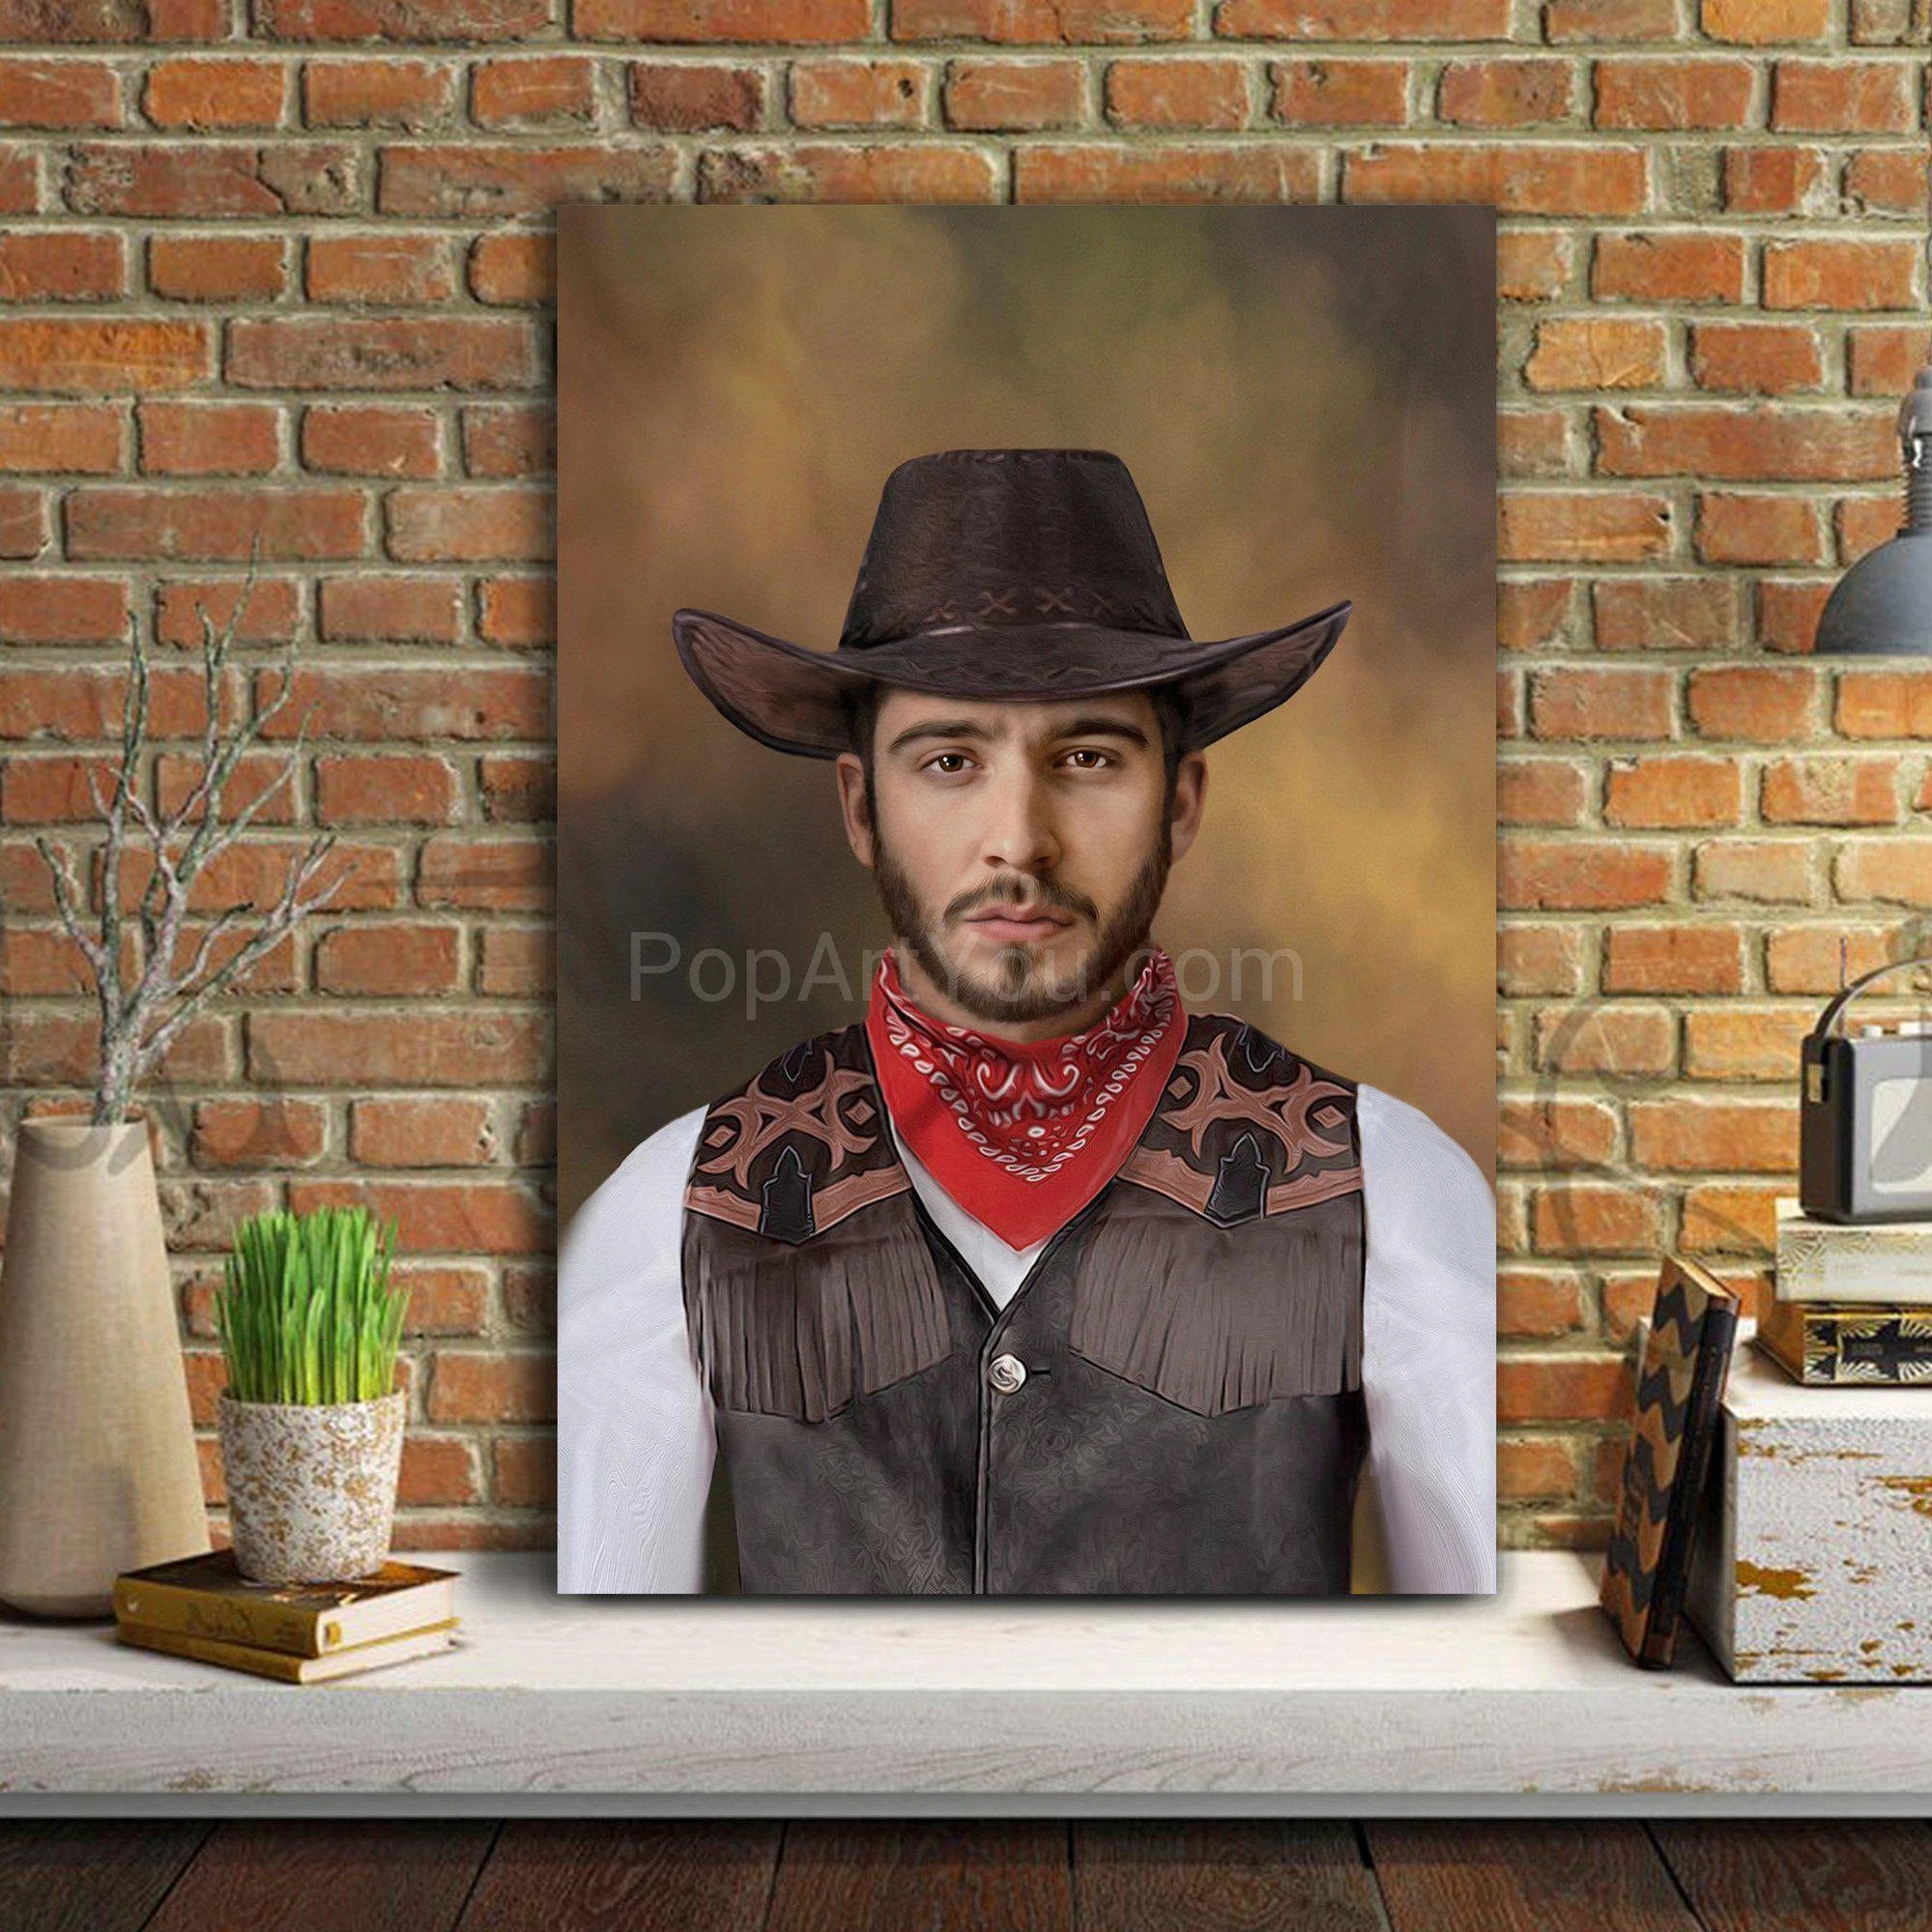 The first version of a Cowboy personalized male portrait poster canvas print